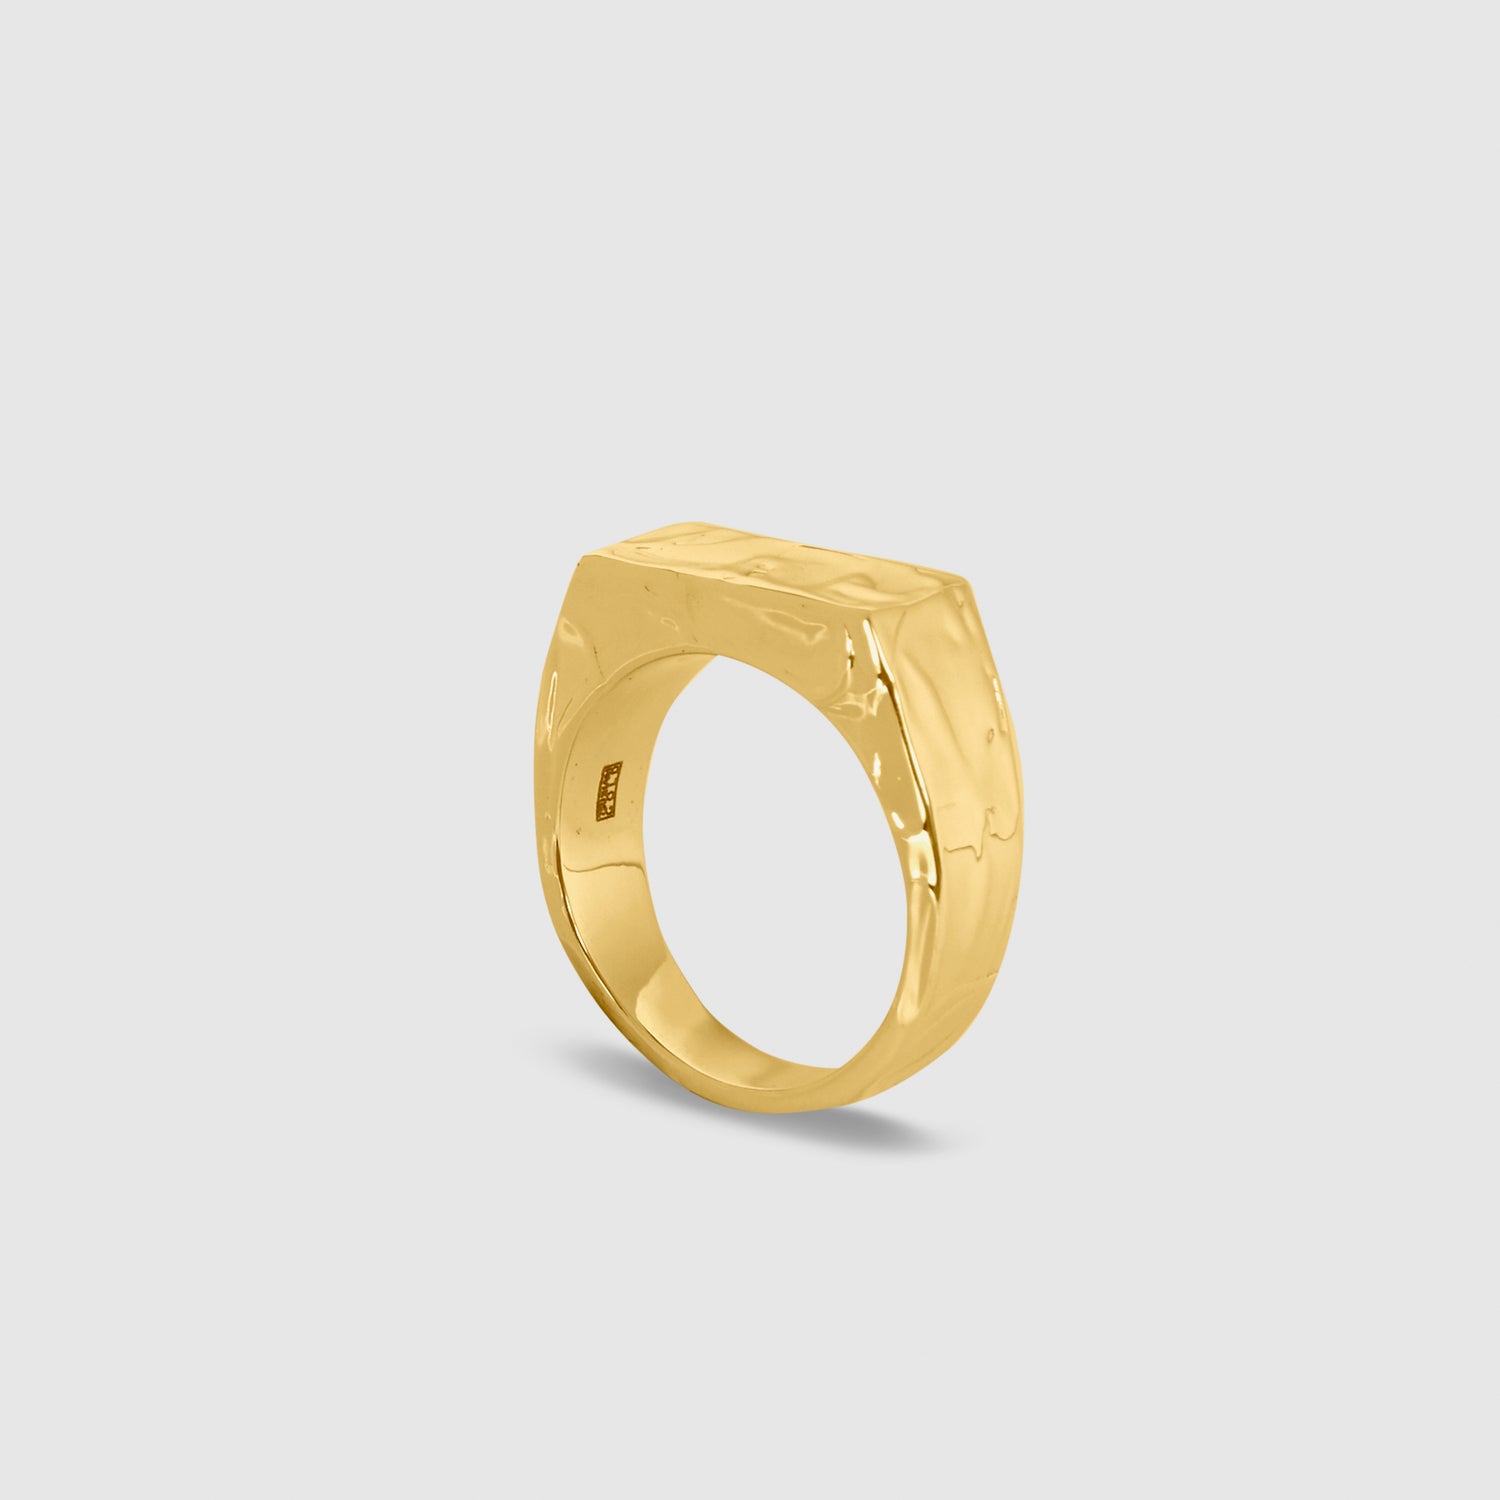 Chevaliere Antre Ring